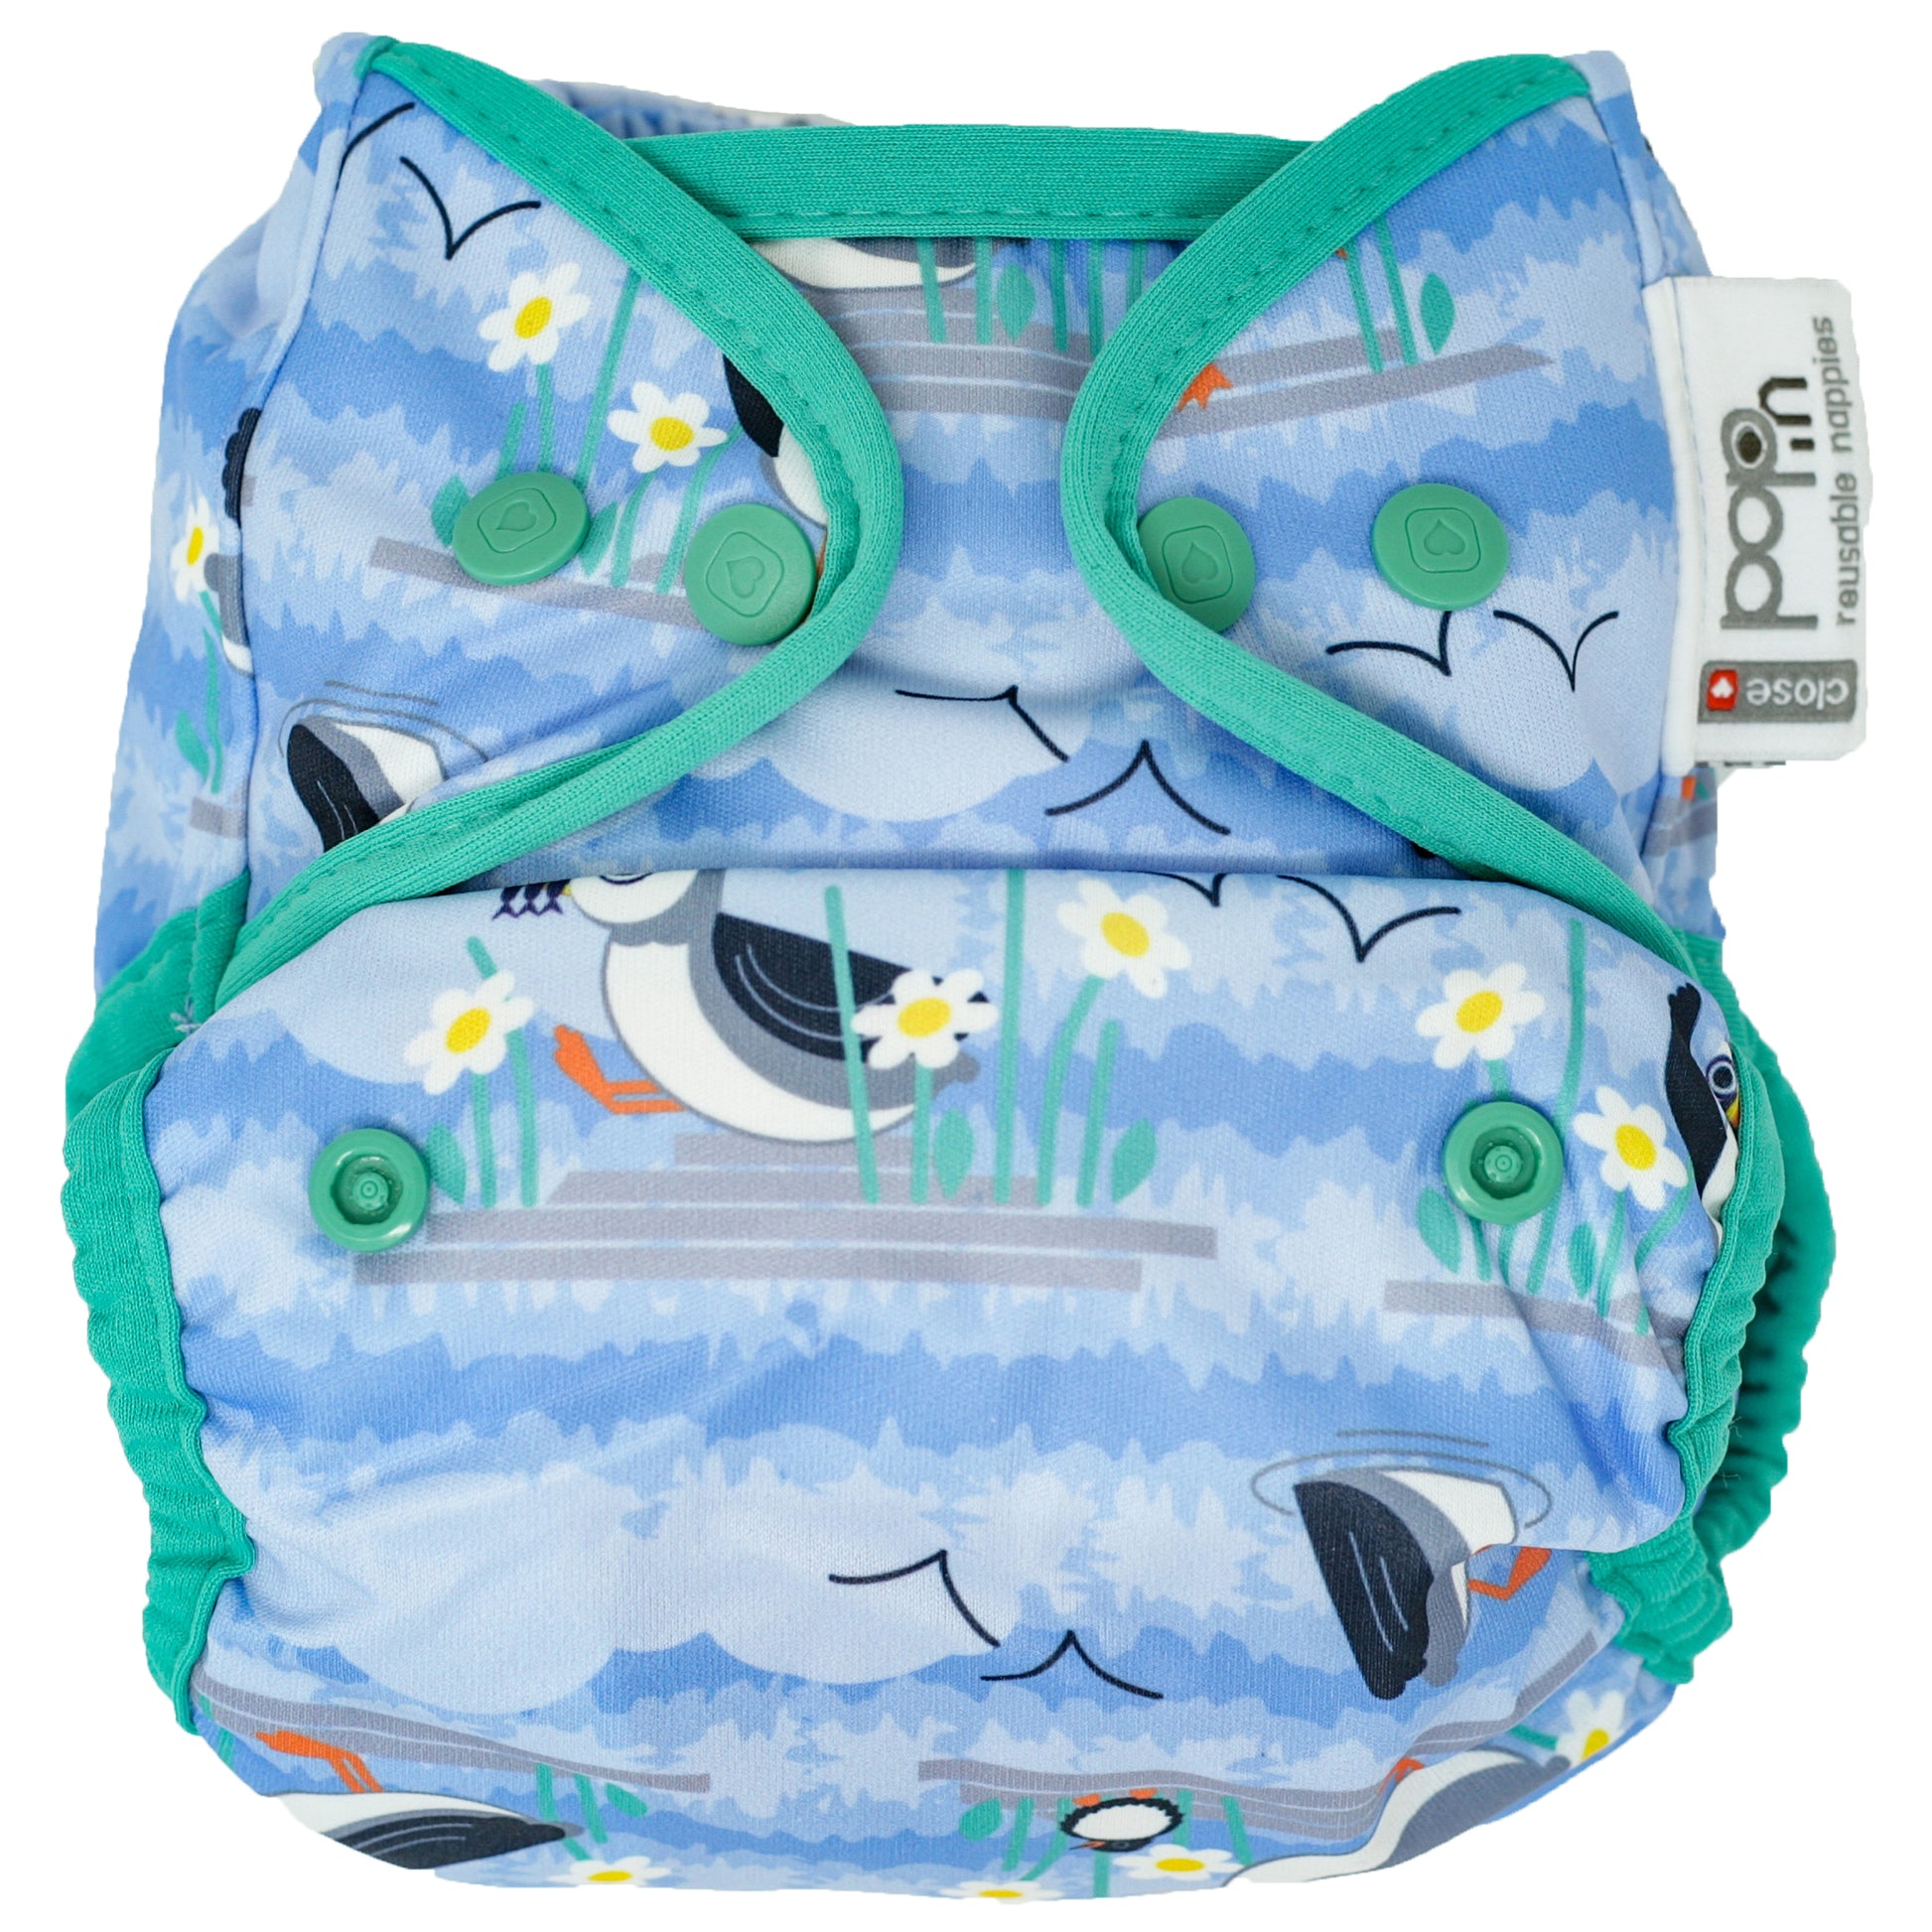 Blue Green Pop-in One Size Puffin Reusable Cloth Nappy, With Popper Fastening